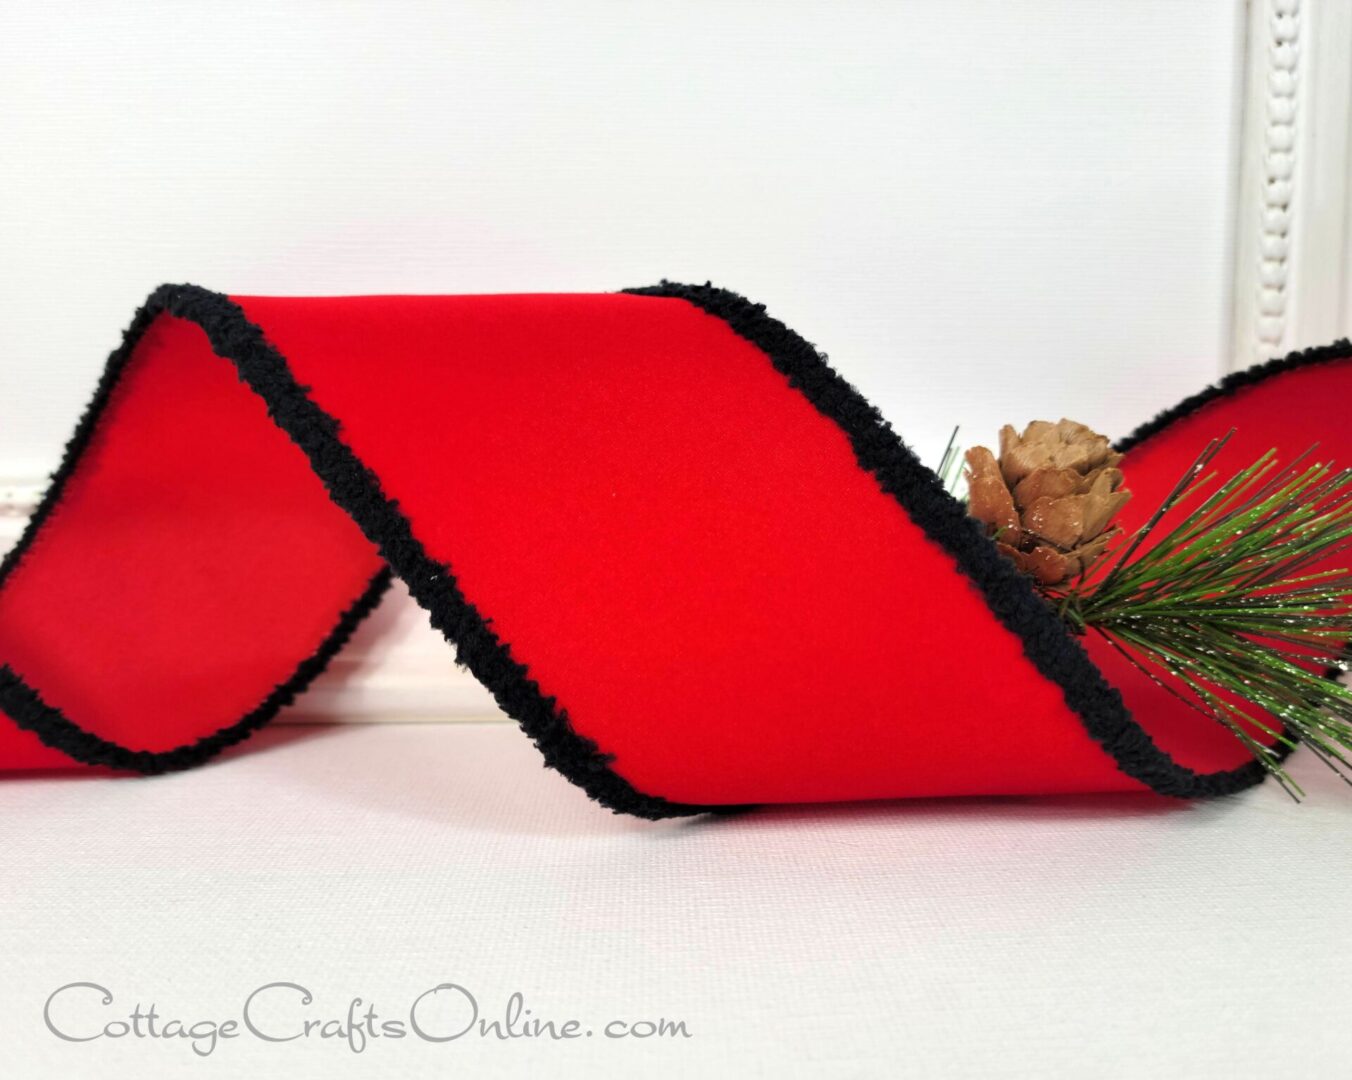 A red ribbon with black trim and pine needles.